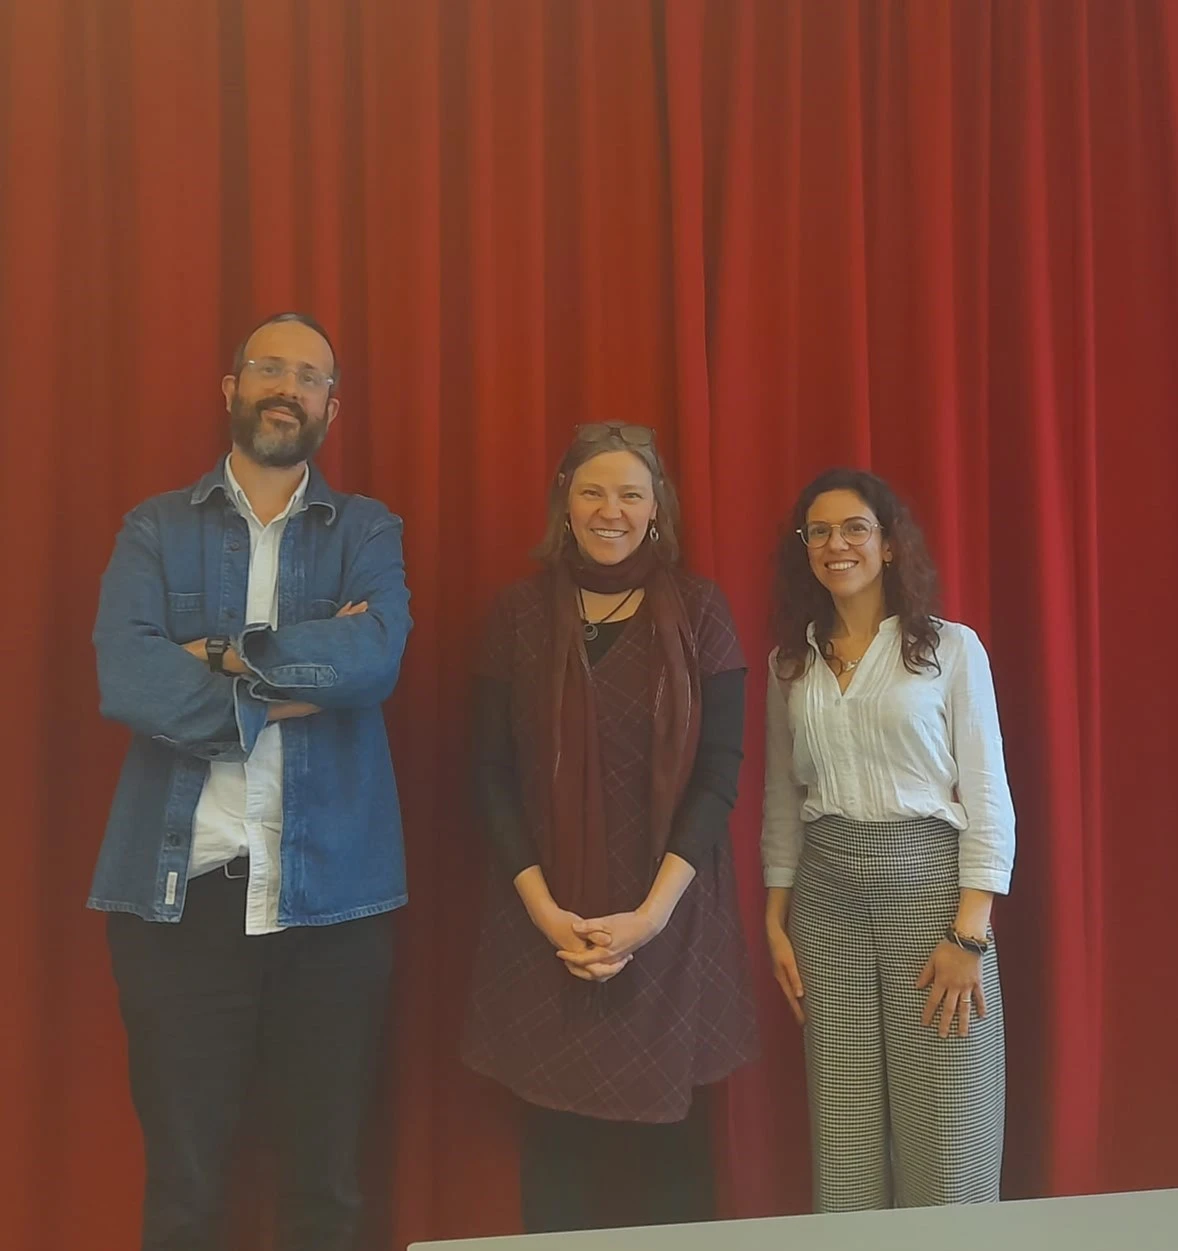 From left to right: Dr. Kristof Titeca, Dr. Jennifer Riggan, and Dr. Milena Belloni